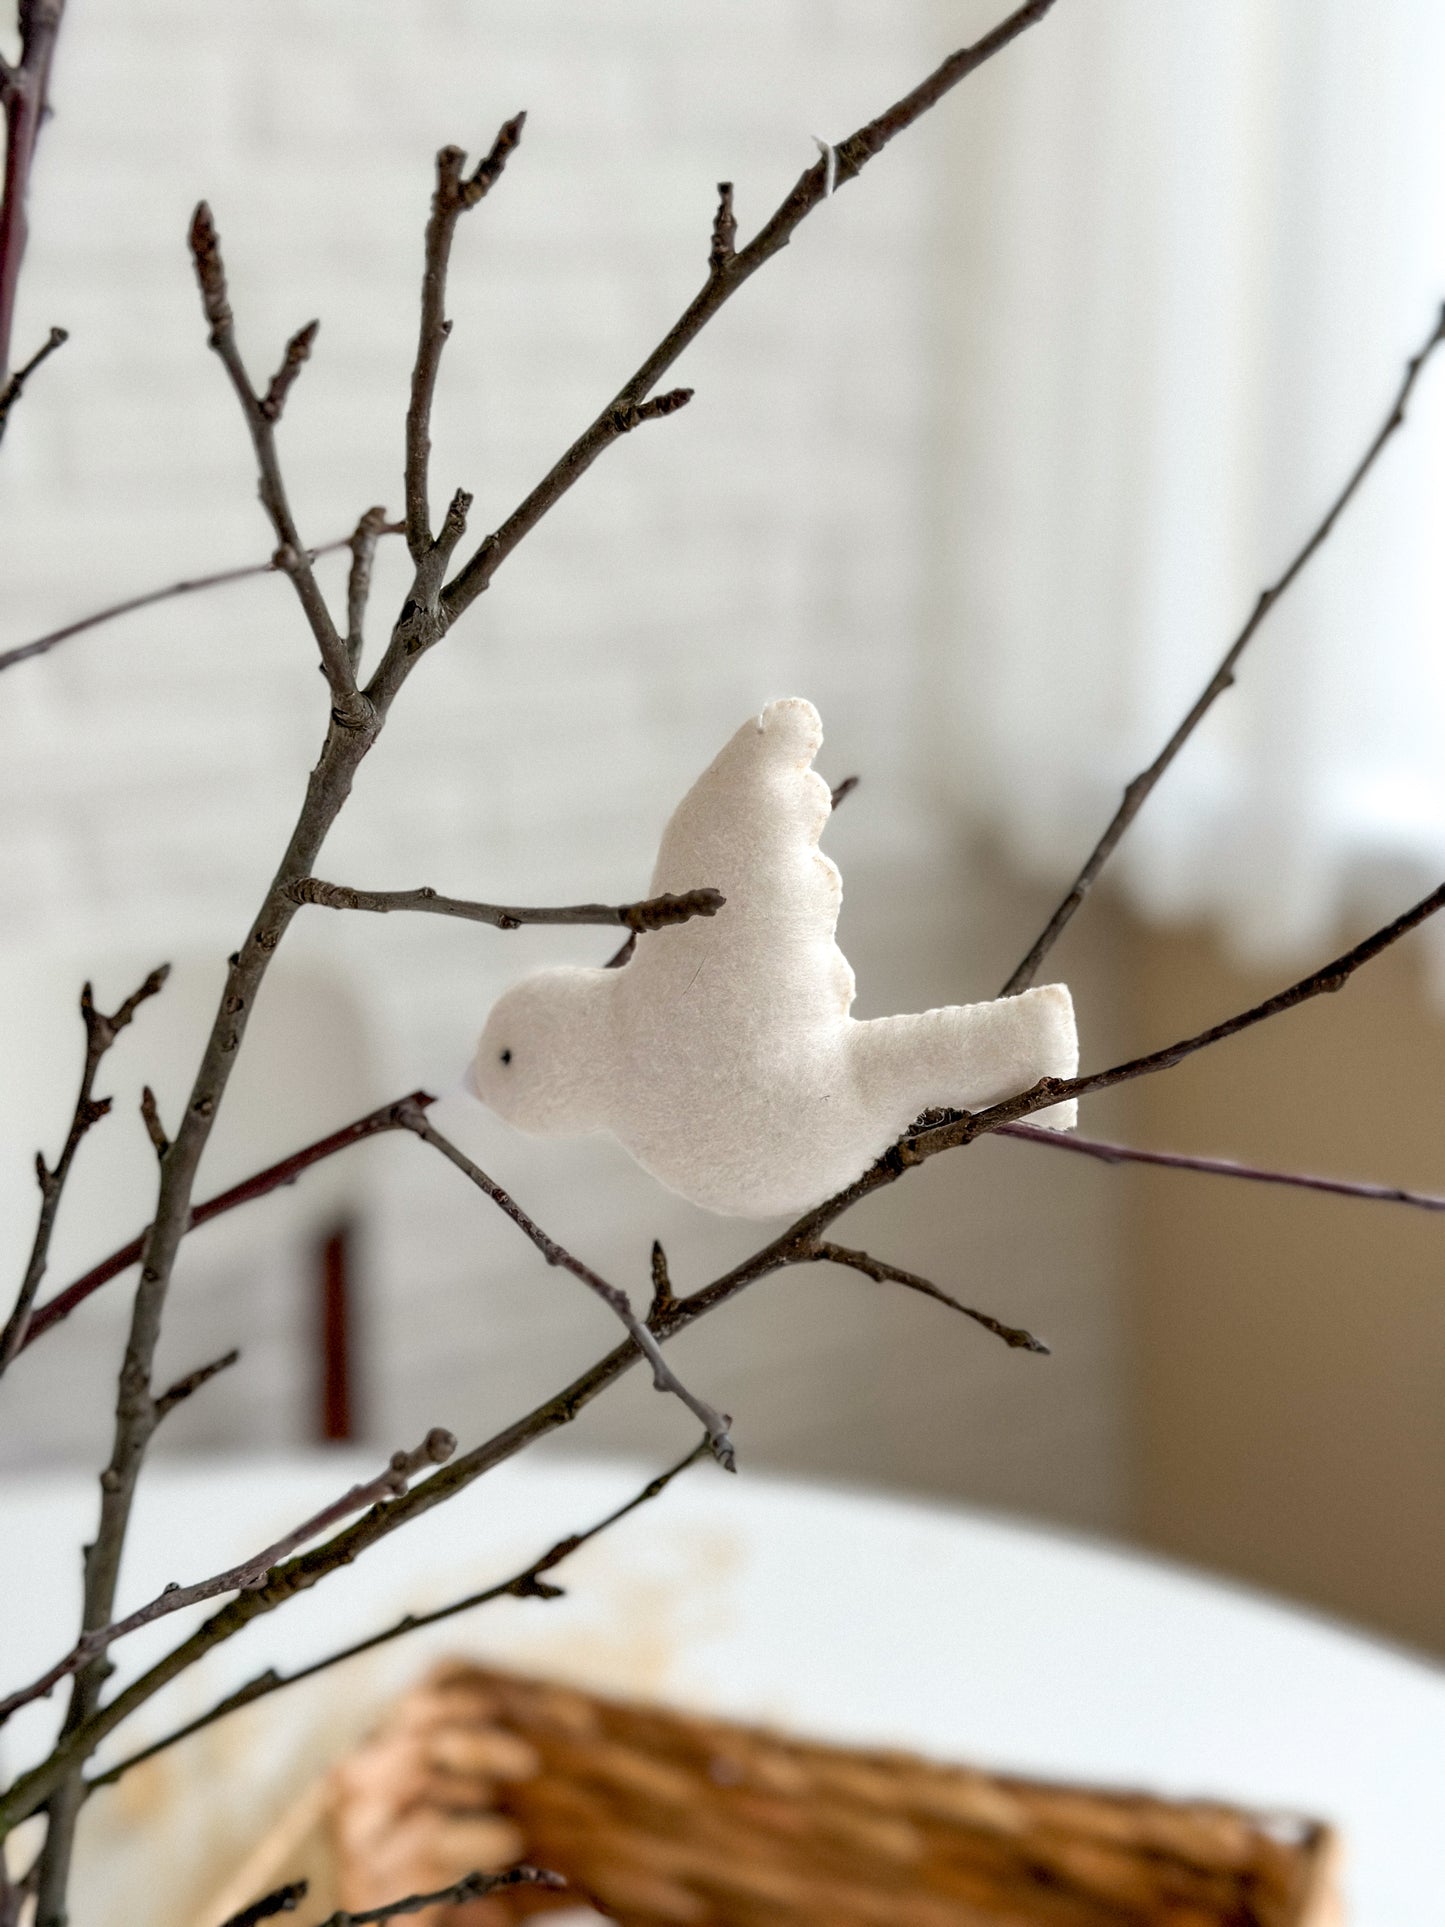 Felt White Bird Ornaments, Easter ornament, Easter decorations, Easter gifts, Easter Tree Decor, Wedding decorations, holiday ornaments